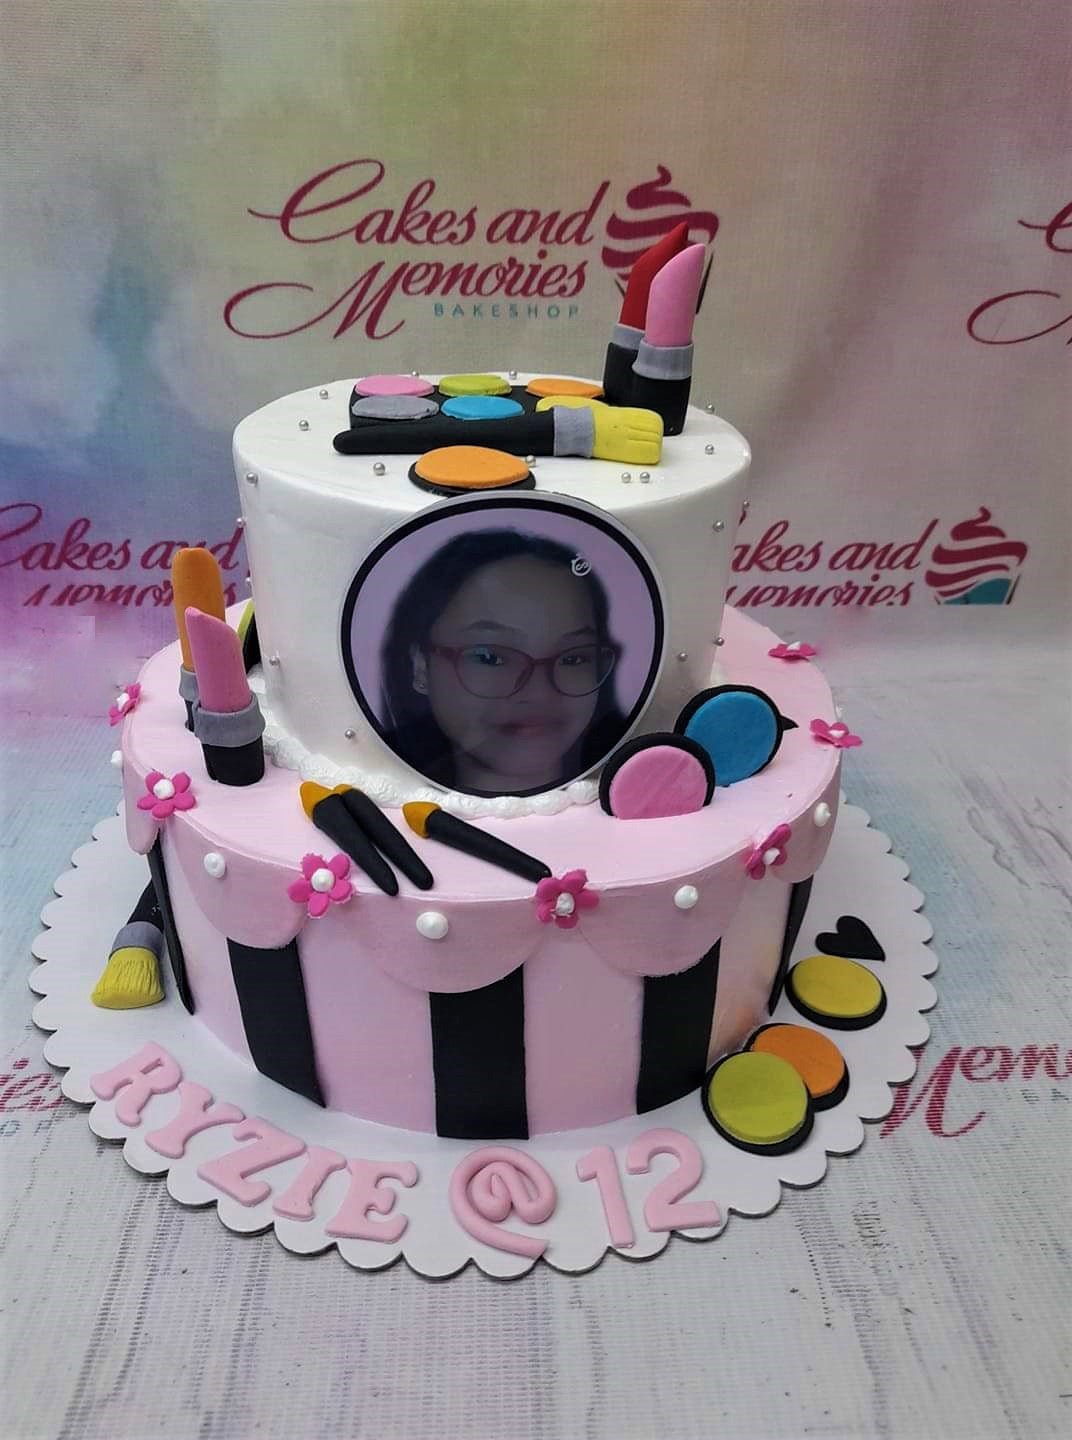 Bags & Shoes Cake - 1130 – Cakes and Memories Bakeshop